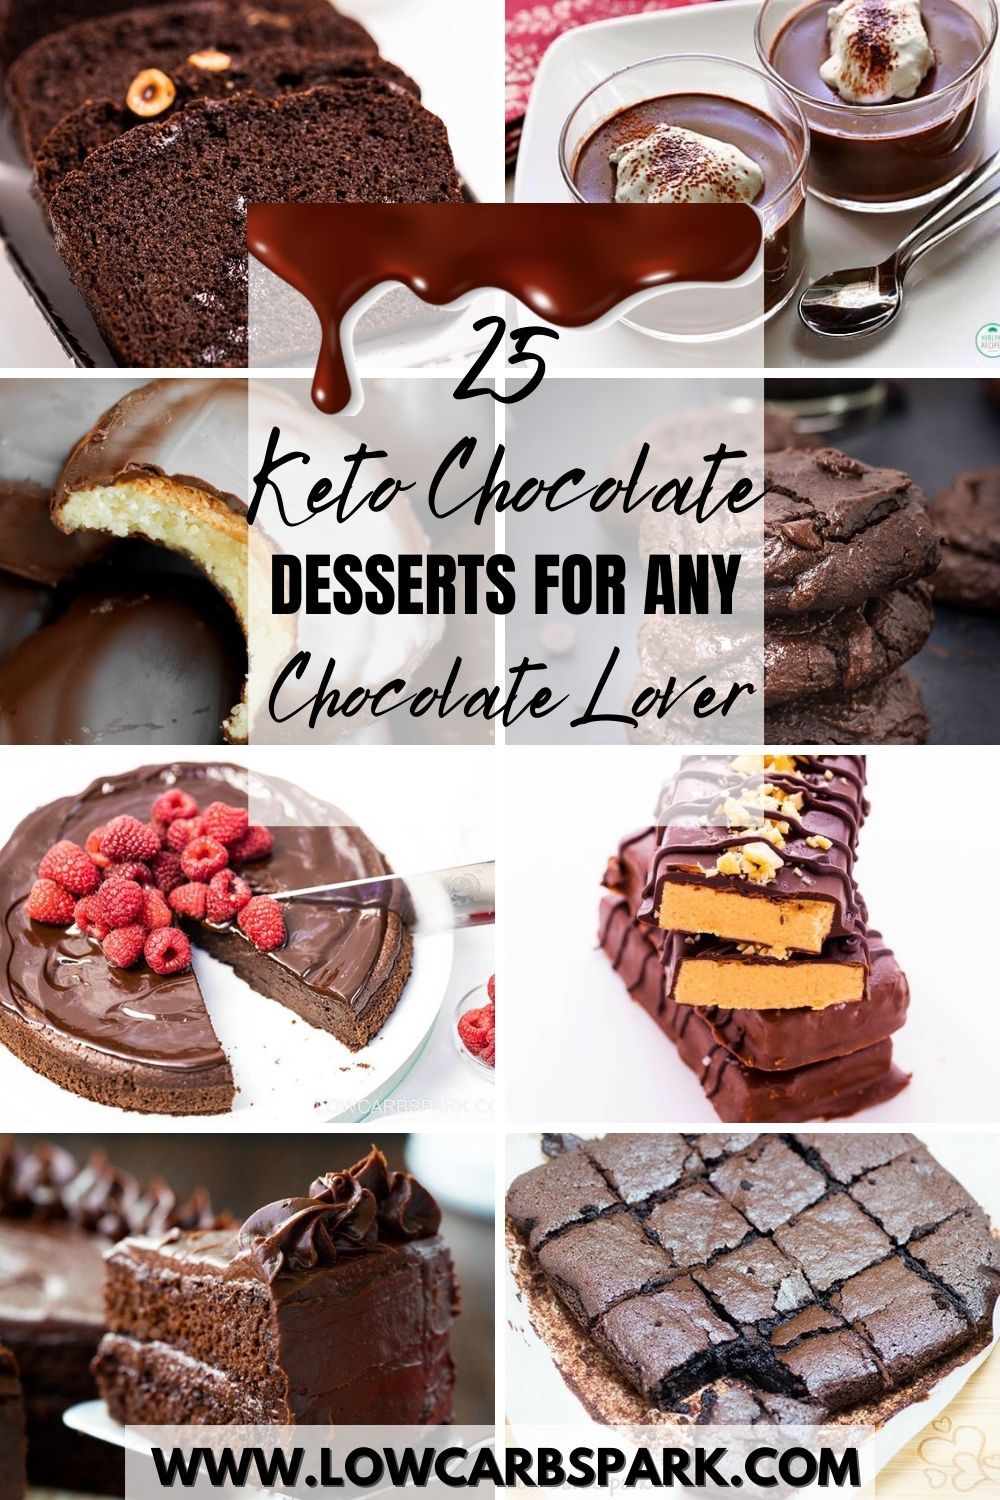 30+ Keto Chocolate Desserts for any Chocolate Lover